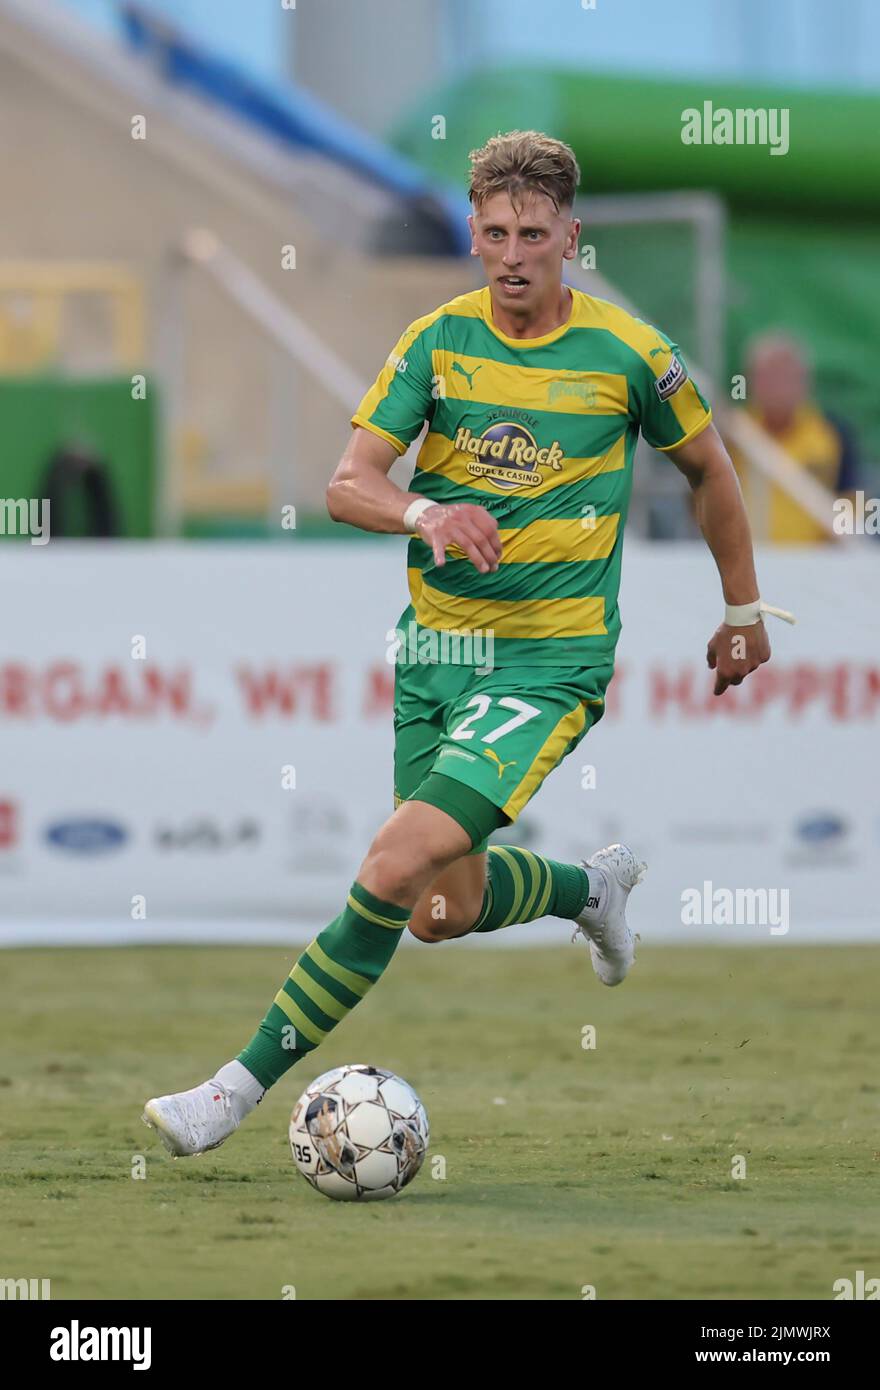 St. Petersburg, FL: Tampa Bay Rowdies midfielder Laurence Wyke (27) dribbles the ball up the pitch during a USL soccer game against Detroit City, Satu Stock Photo